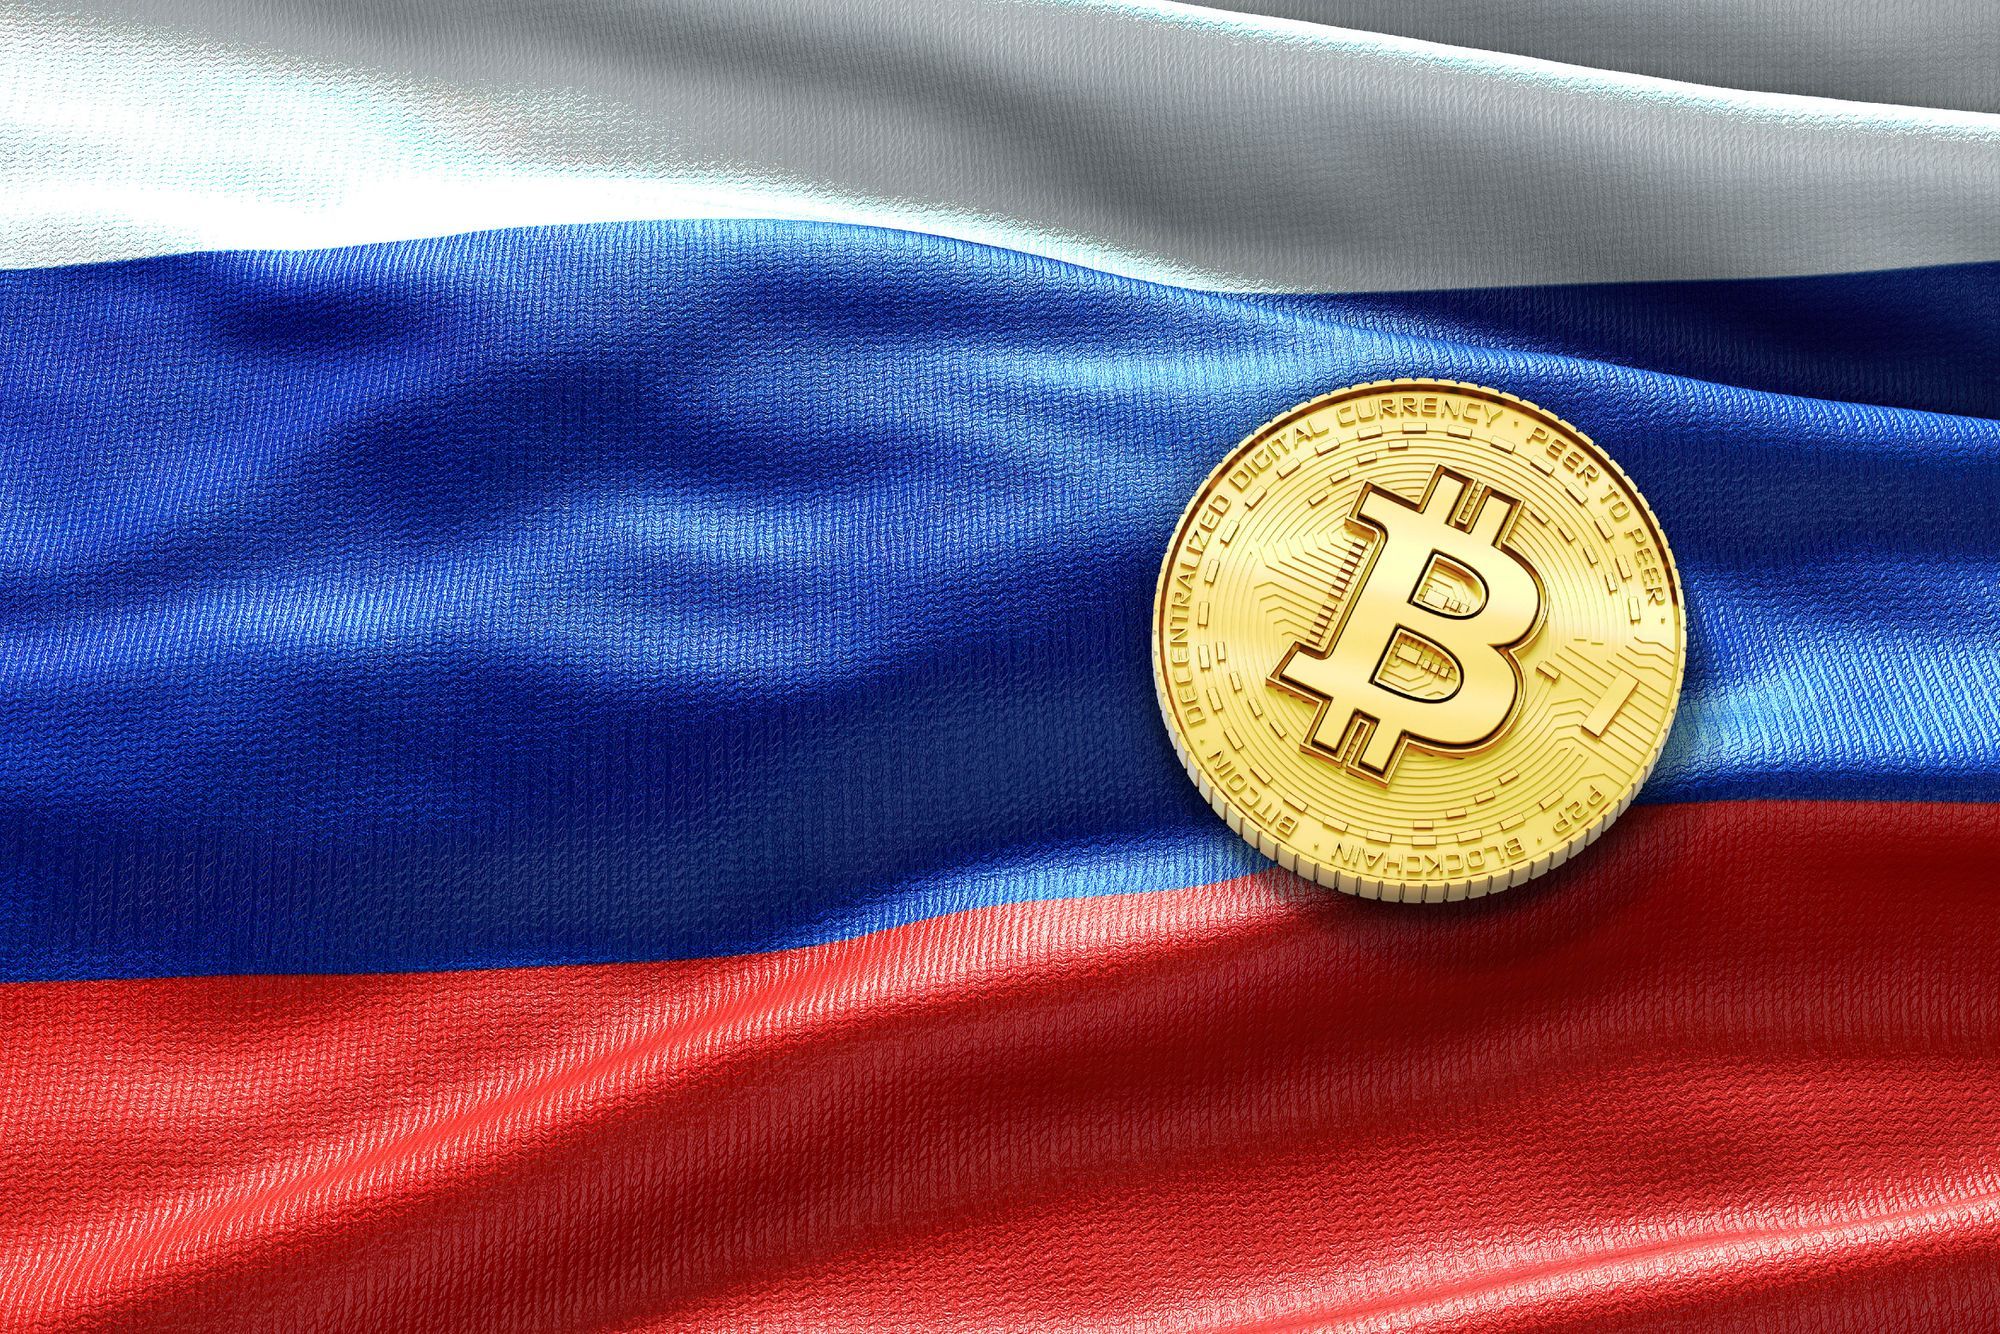 Could Russia Get Cut off from Bitcoin?